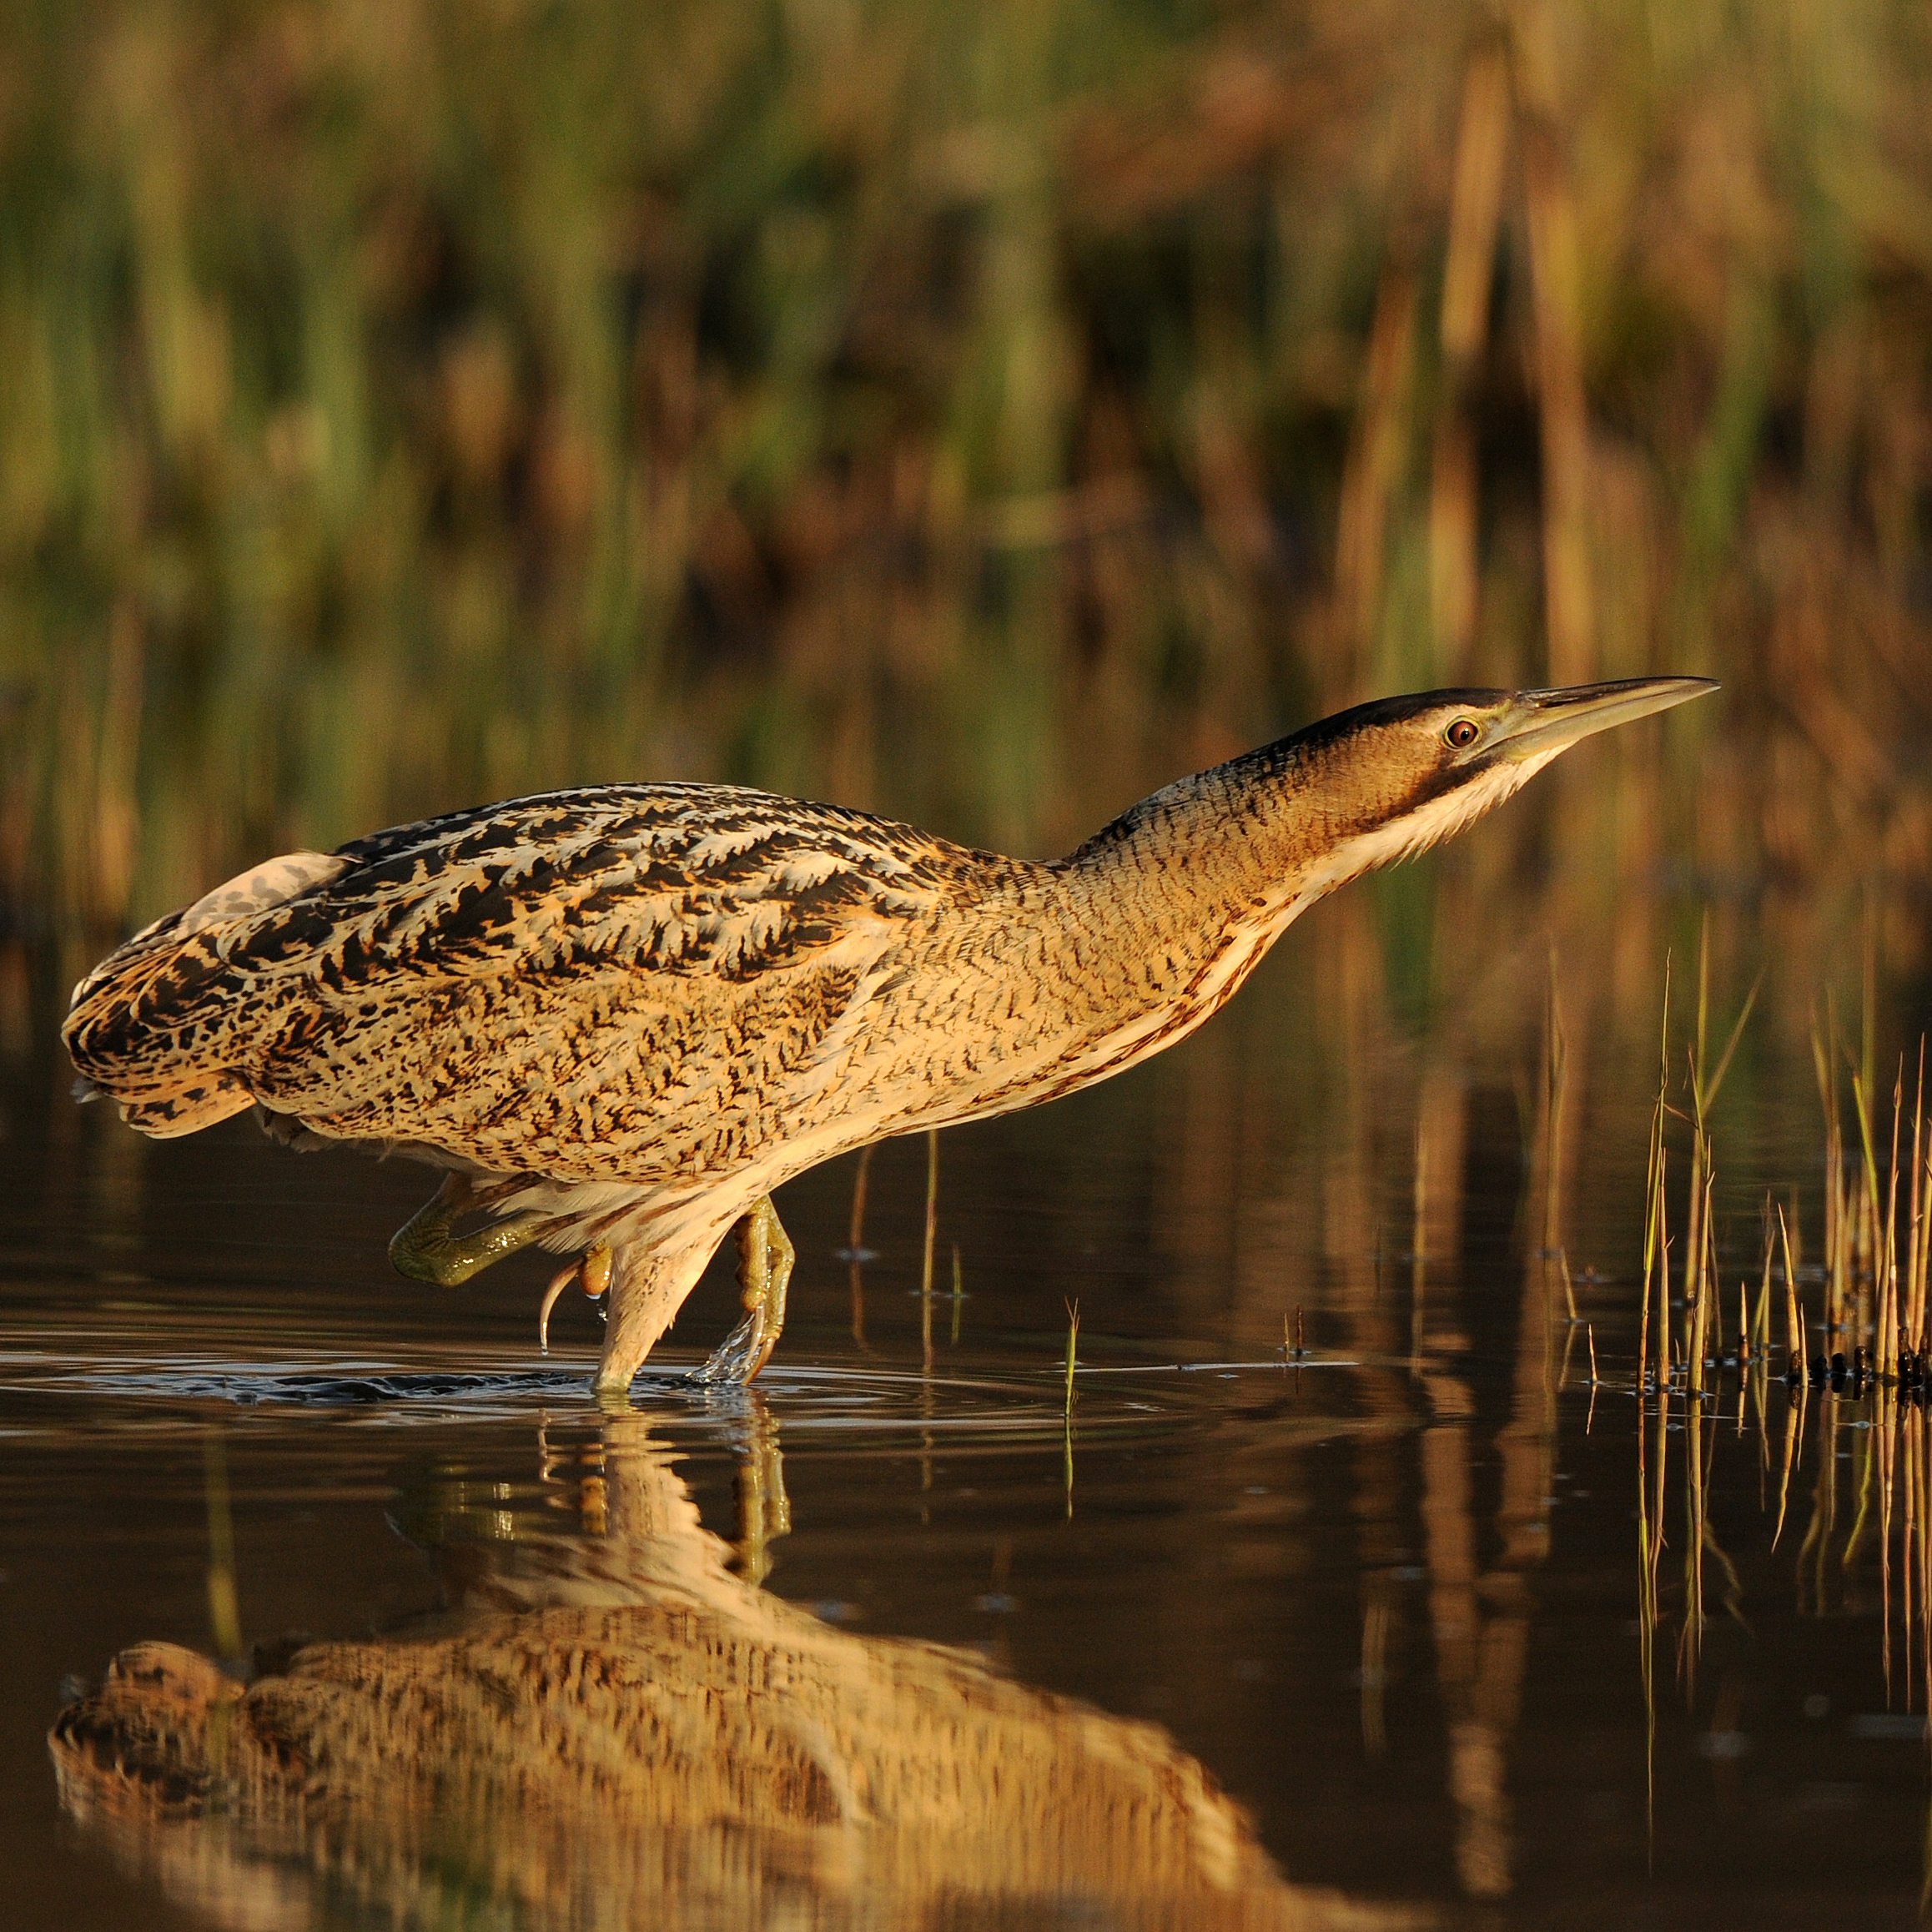 a bittern in shallow water in front of reeds